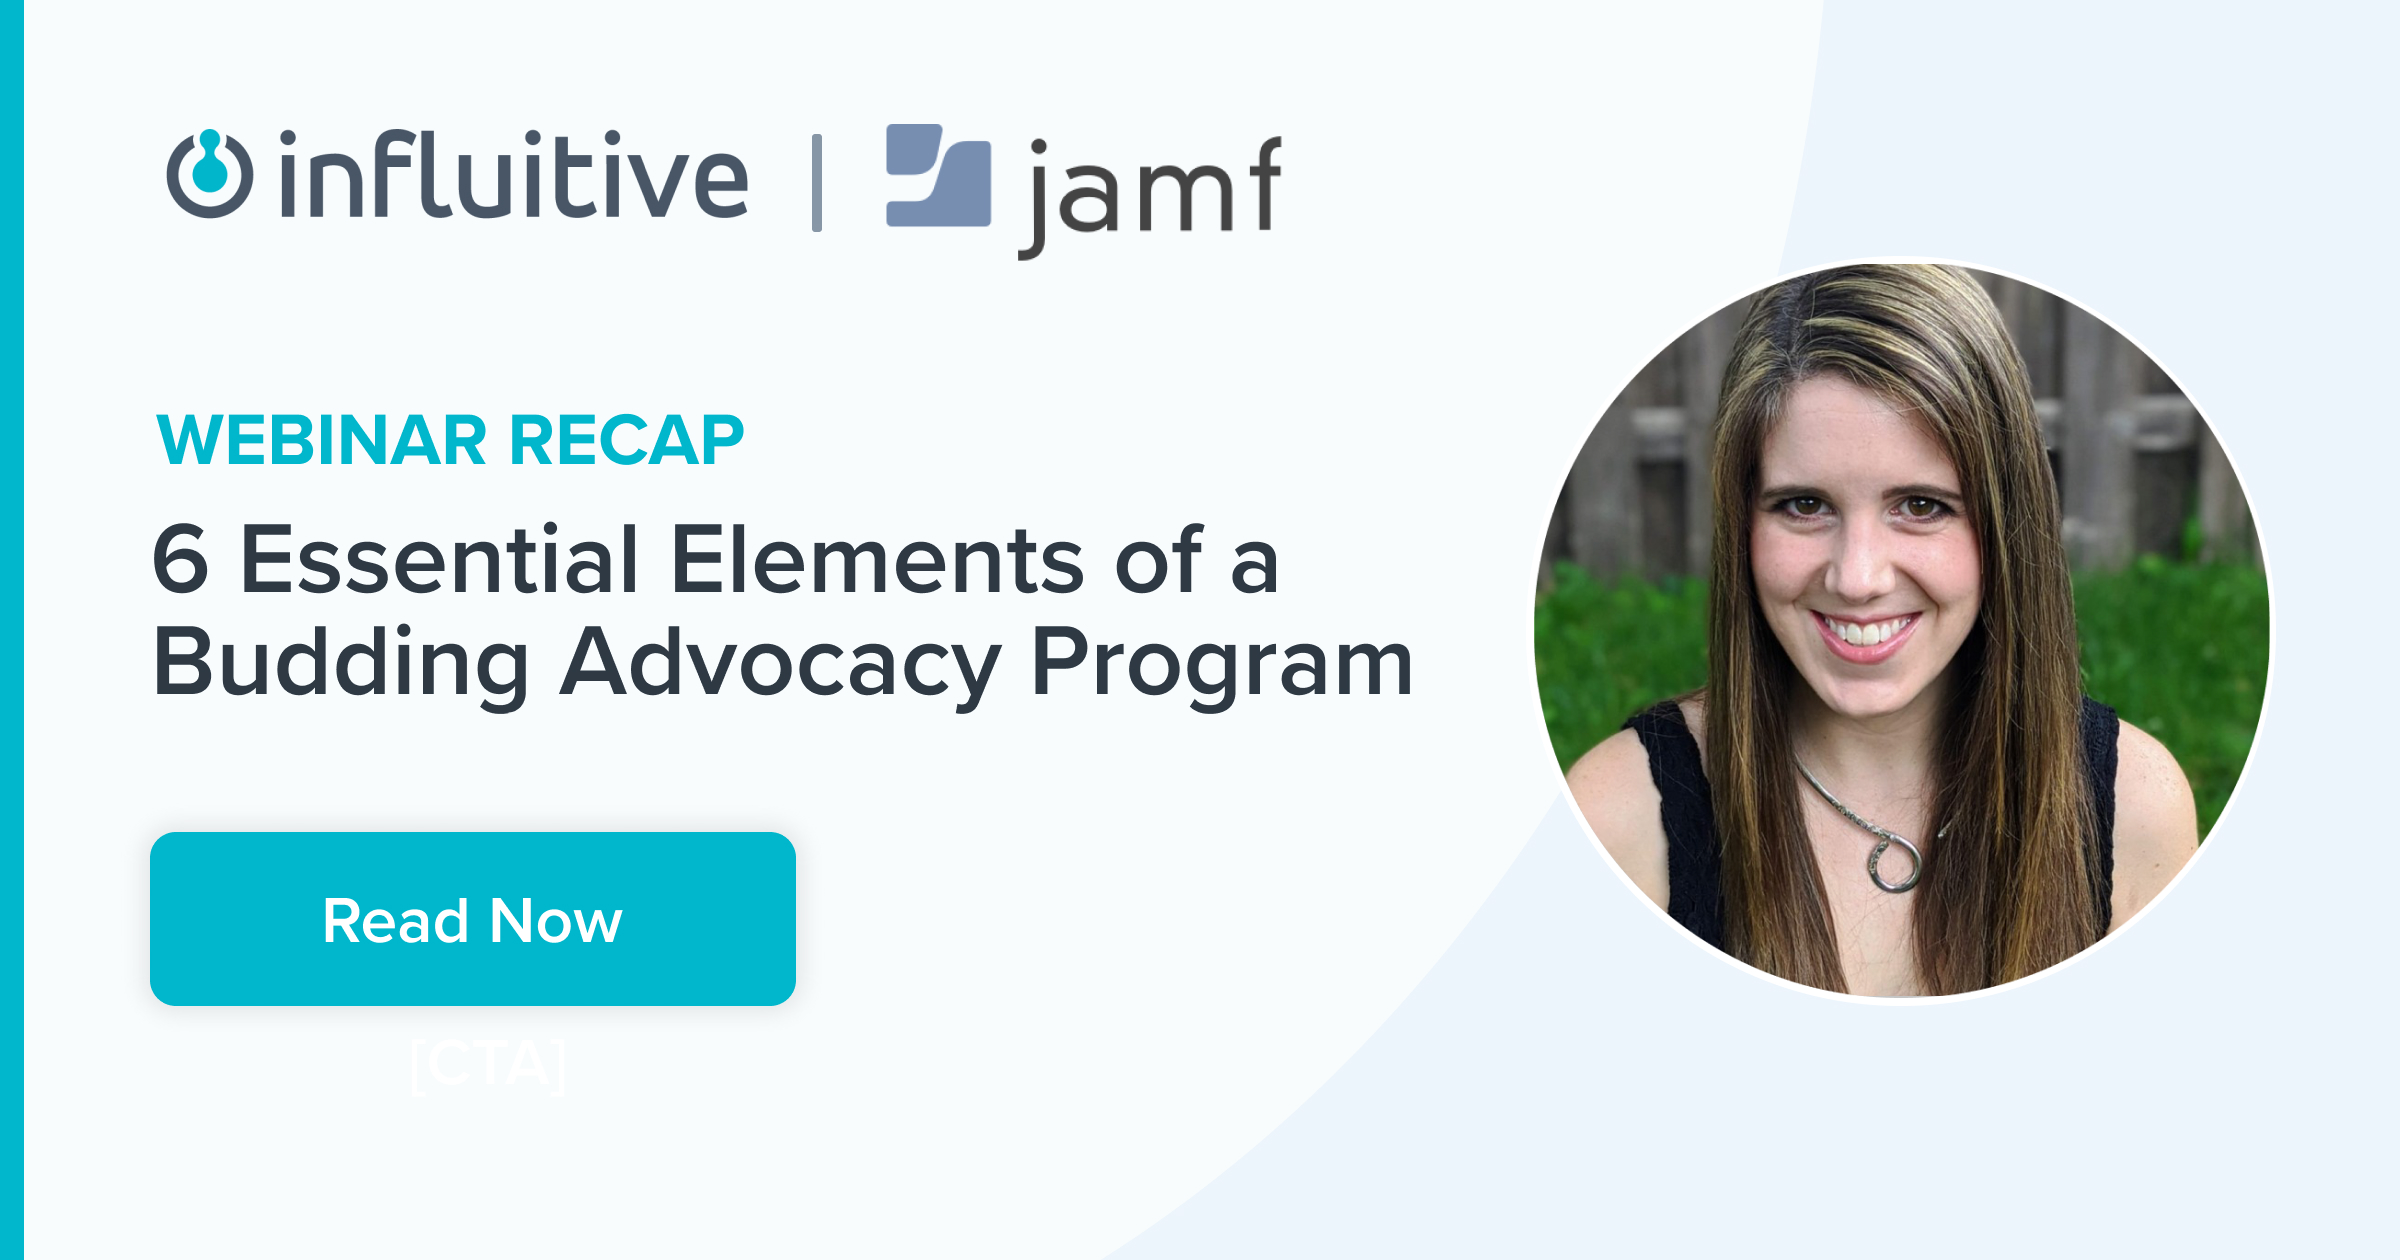 Jamf Influitive Blog May 2022